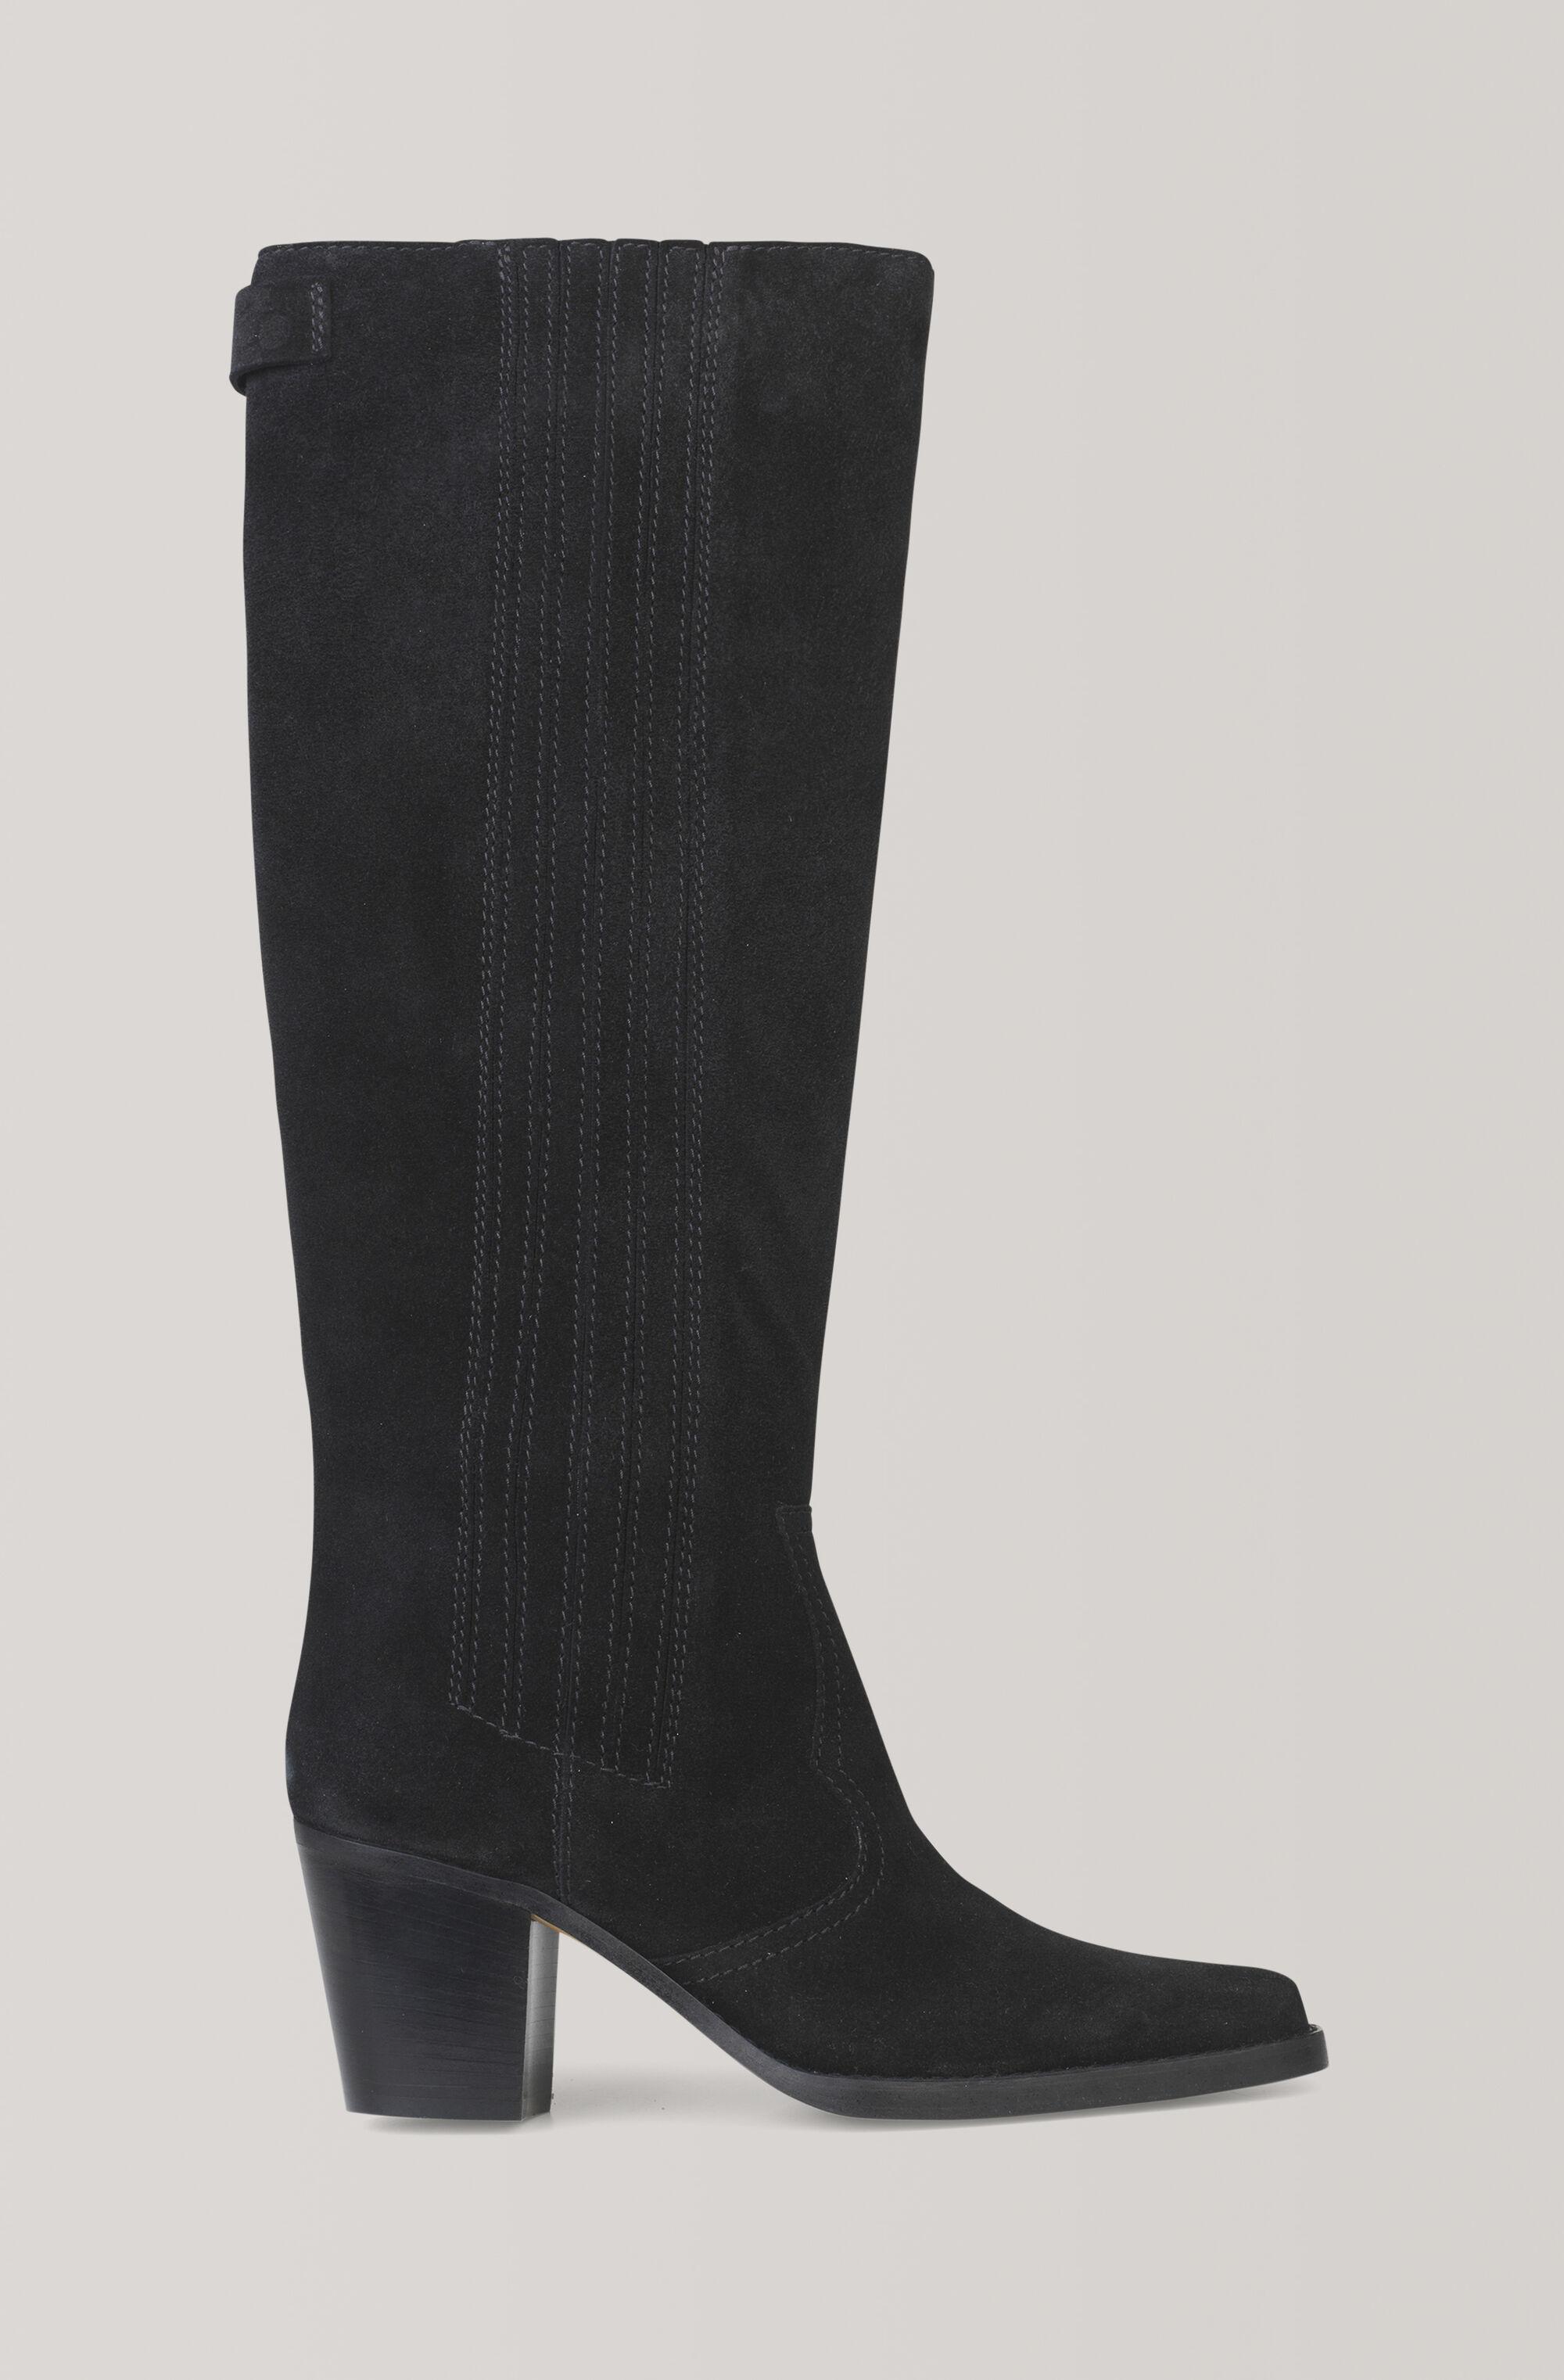 Ganni Leather Western Knee High Boots in Black - Lyst